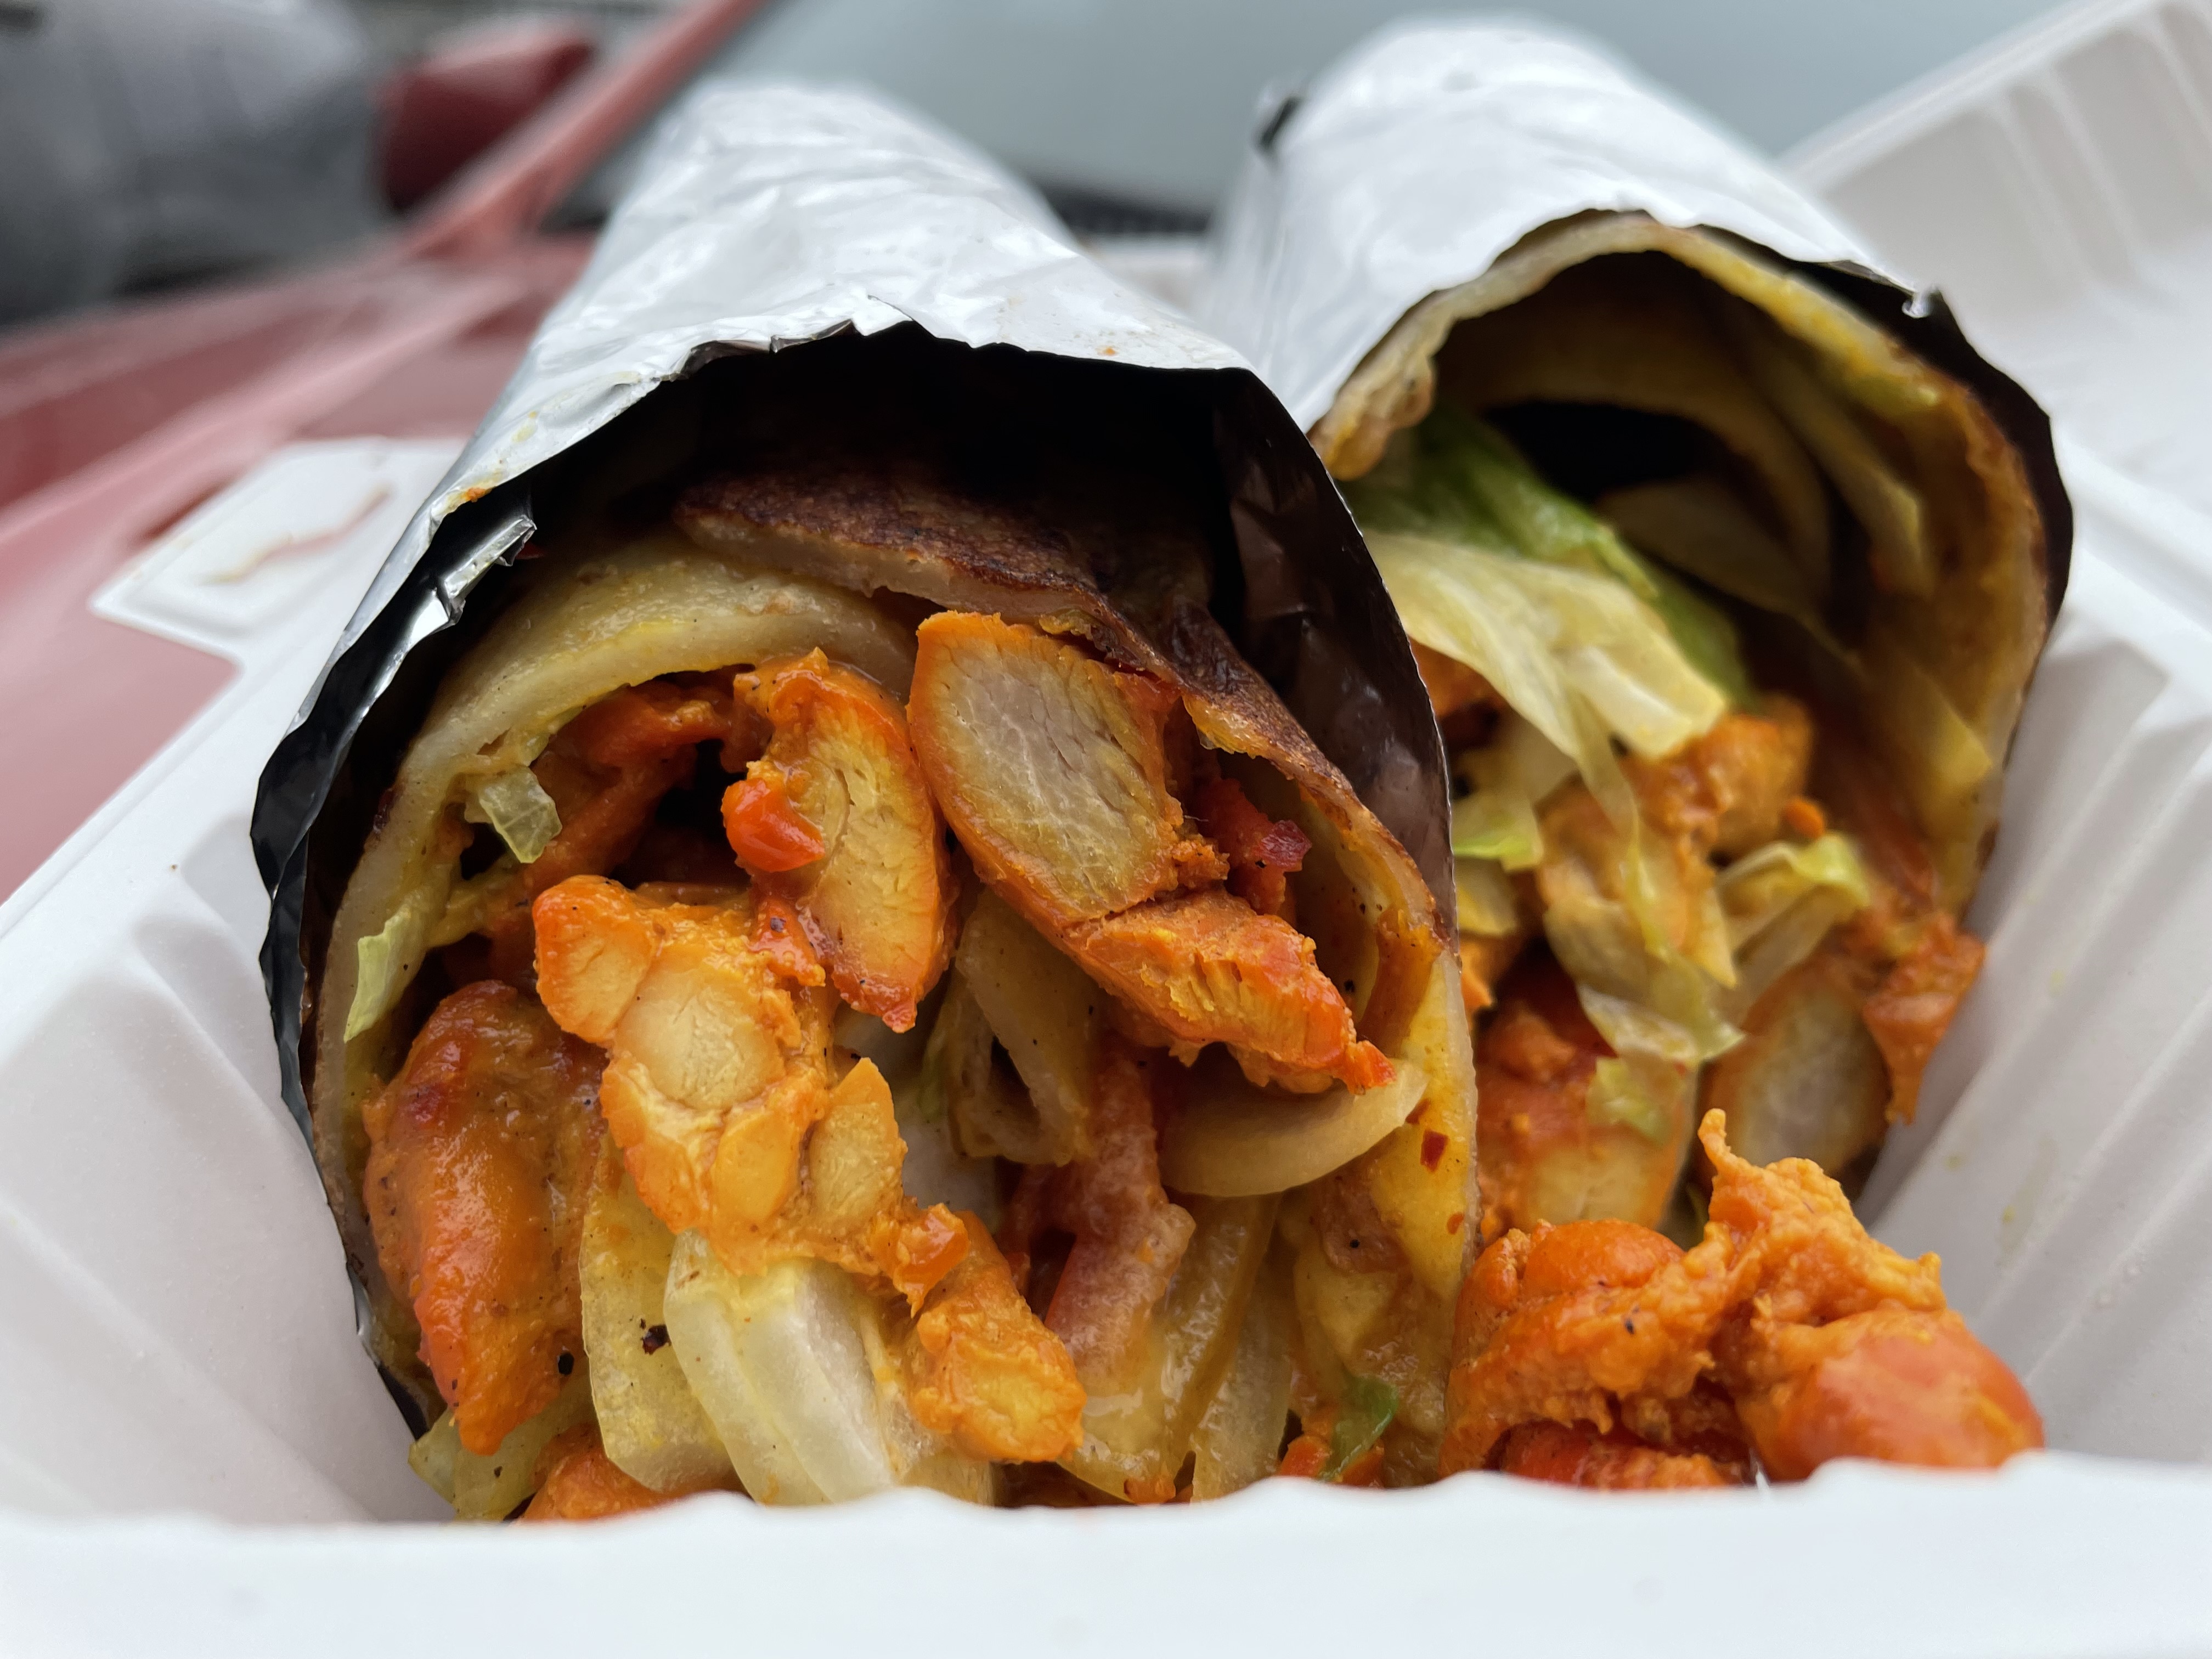 The spicy chicken wrap came with tender chunks of grilled and spiced chicken, lettuce and crunchy onions